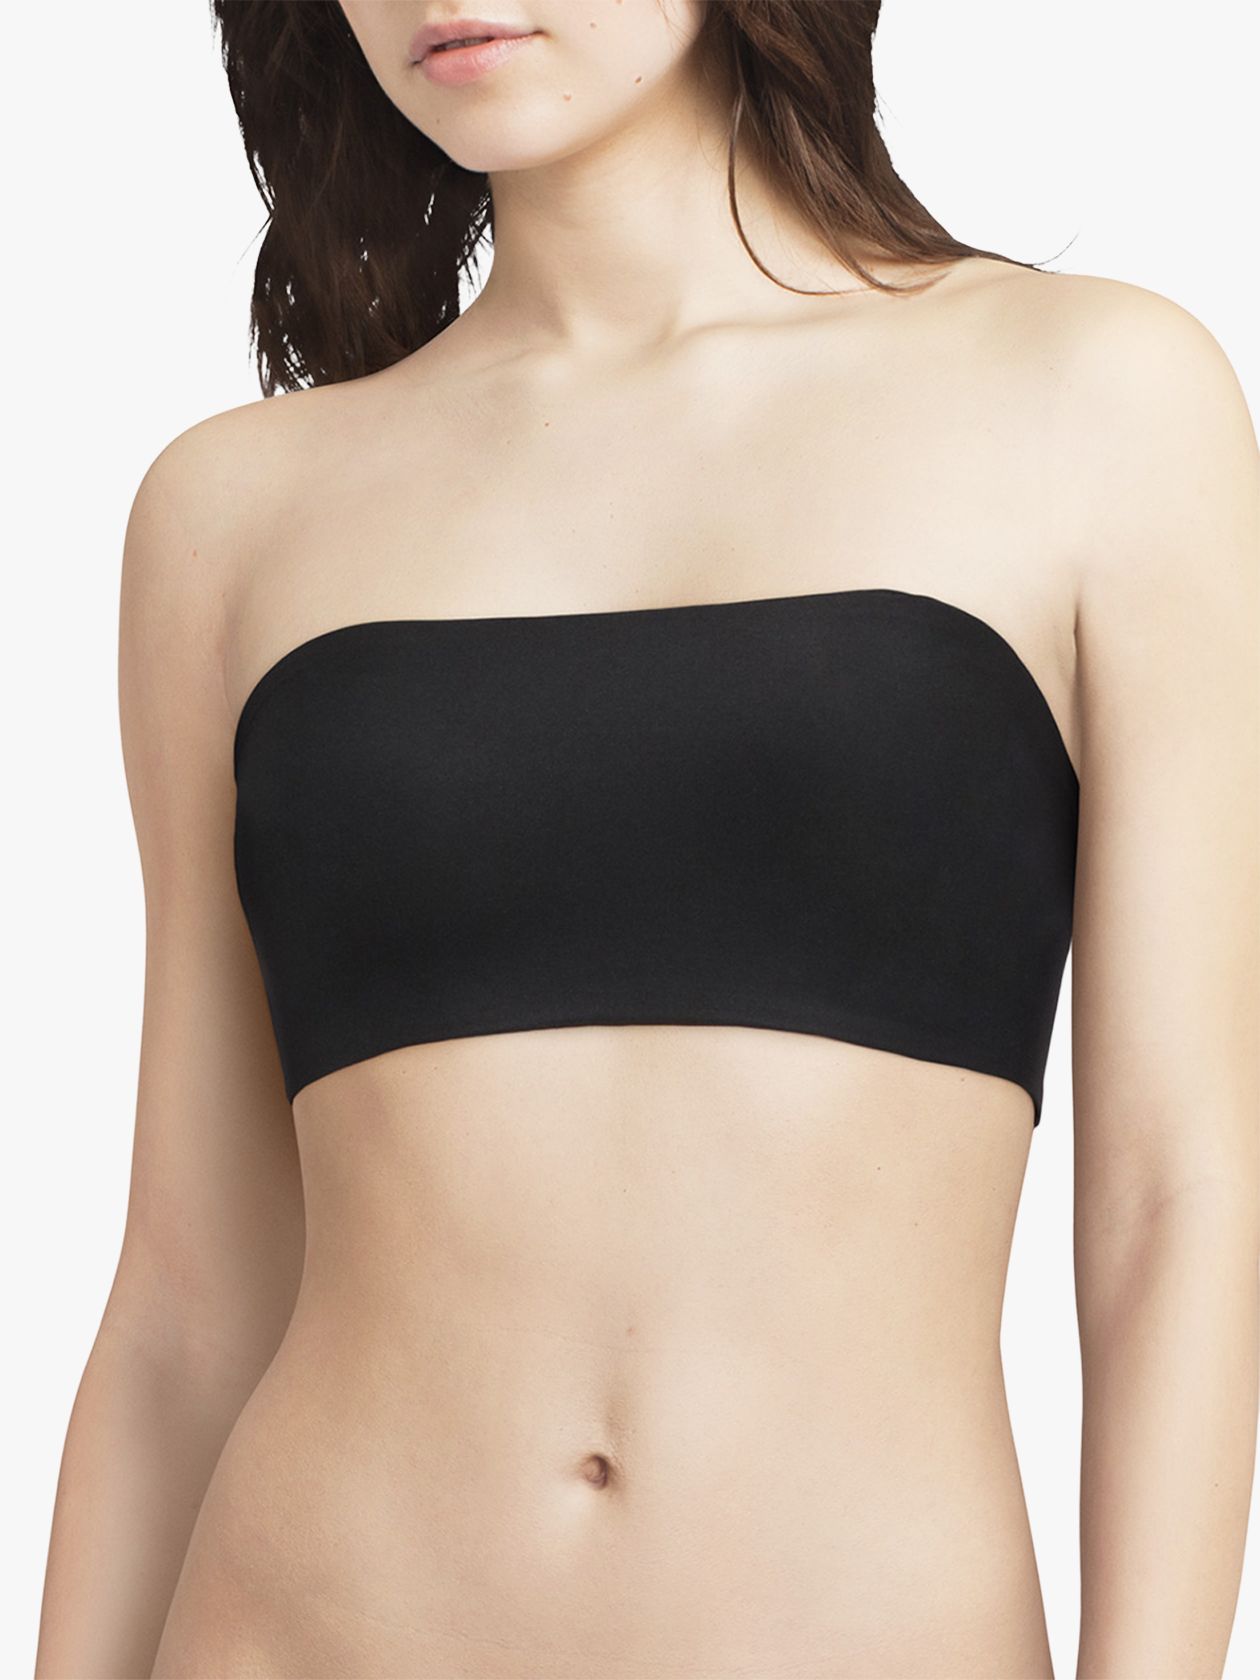 Ausyst Tube Tops for Women Stretch Strapless Bra,Summer Bandeau